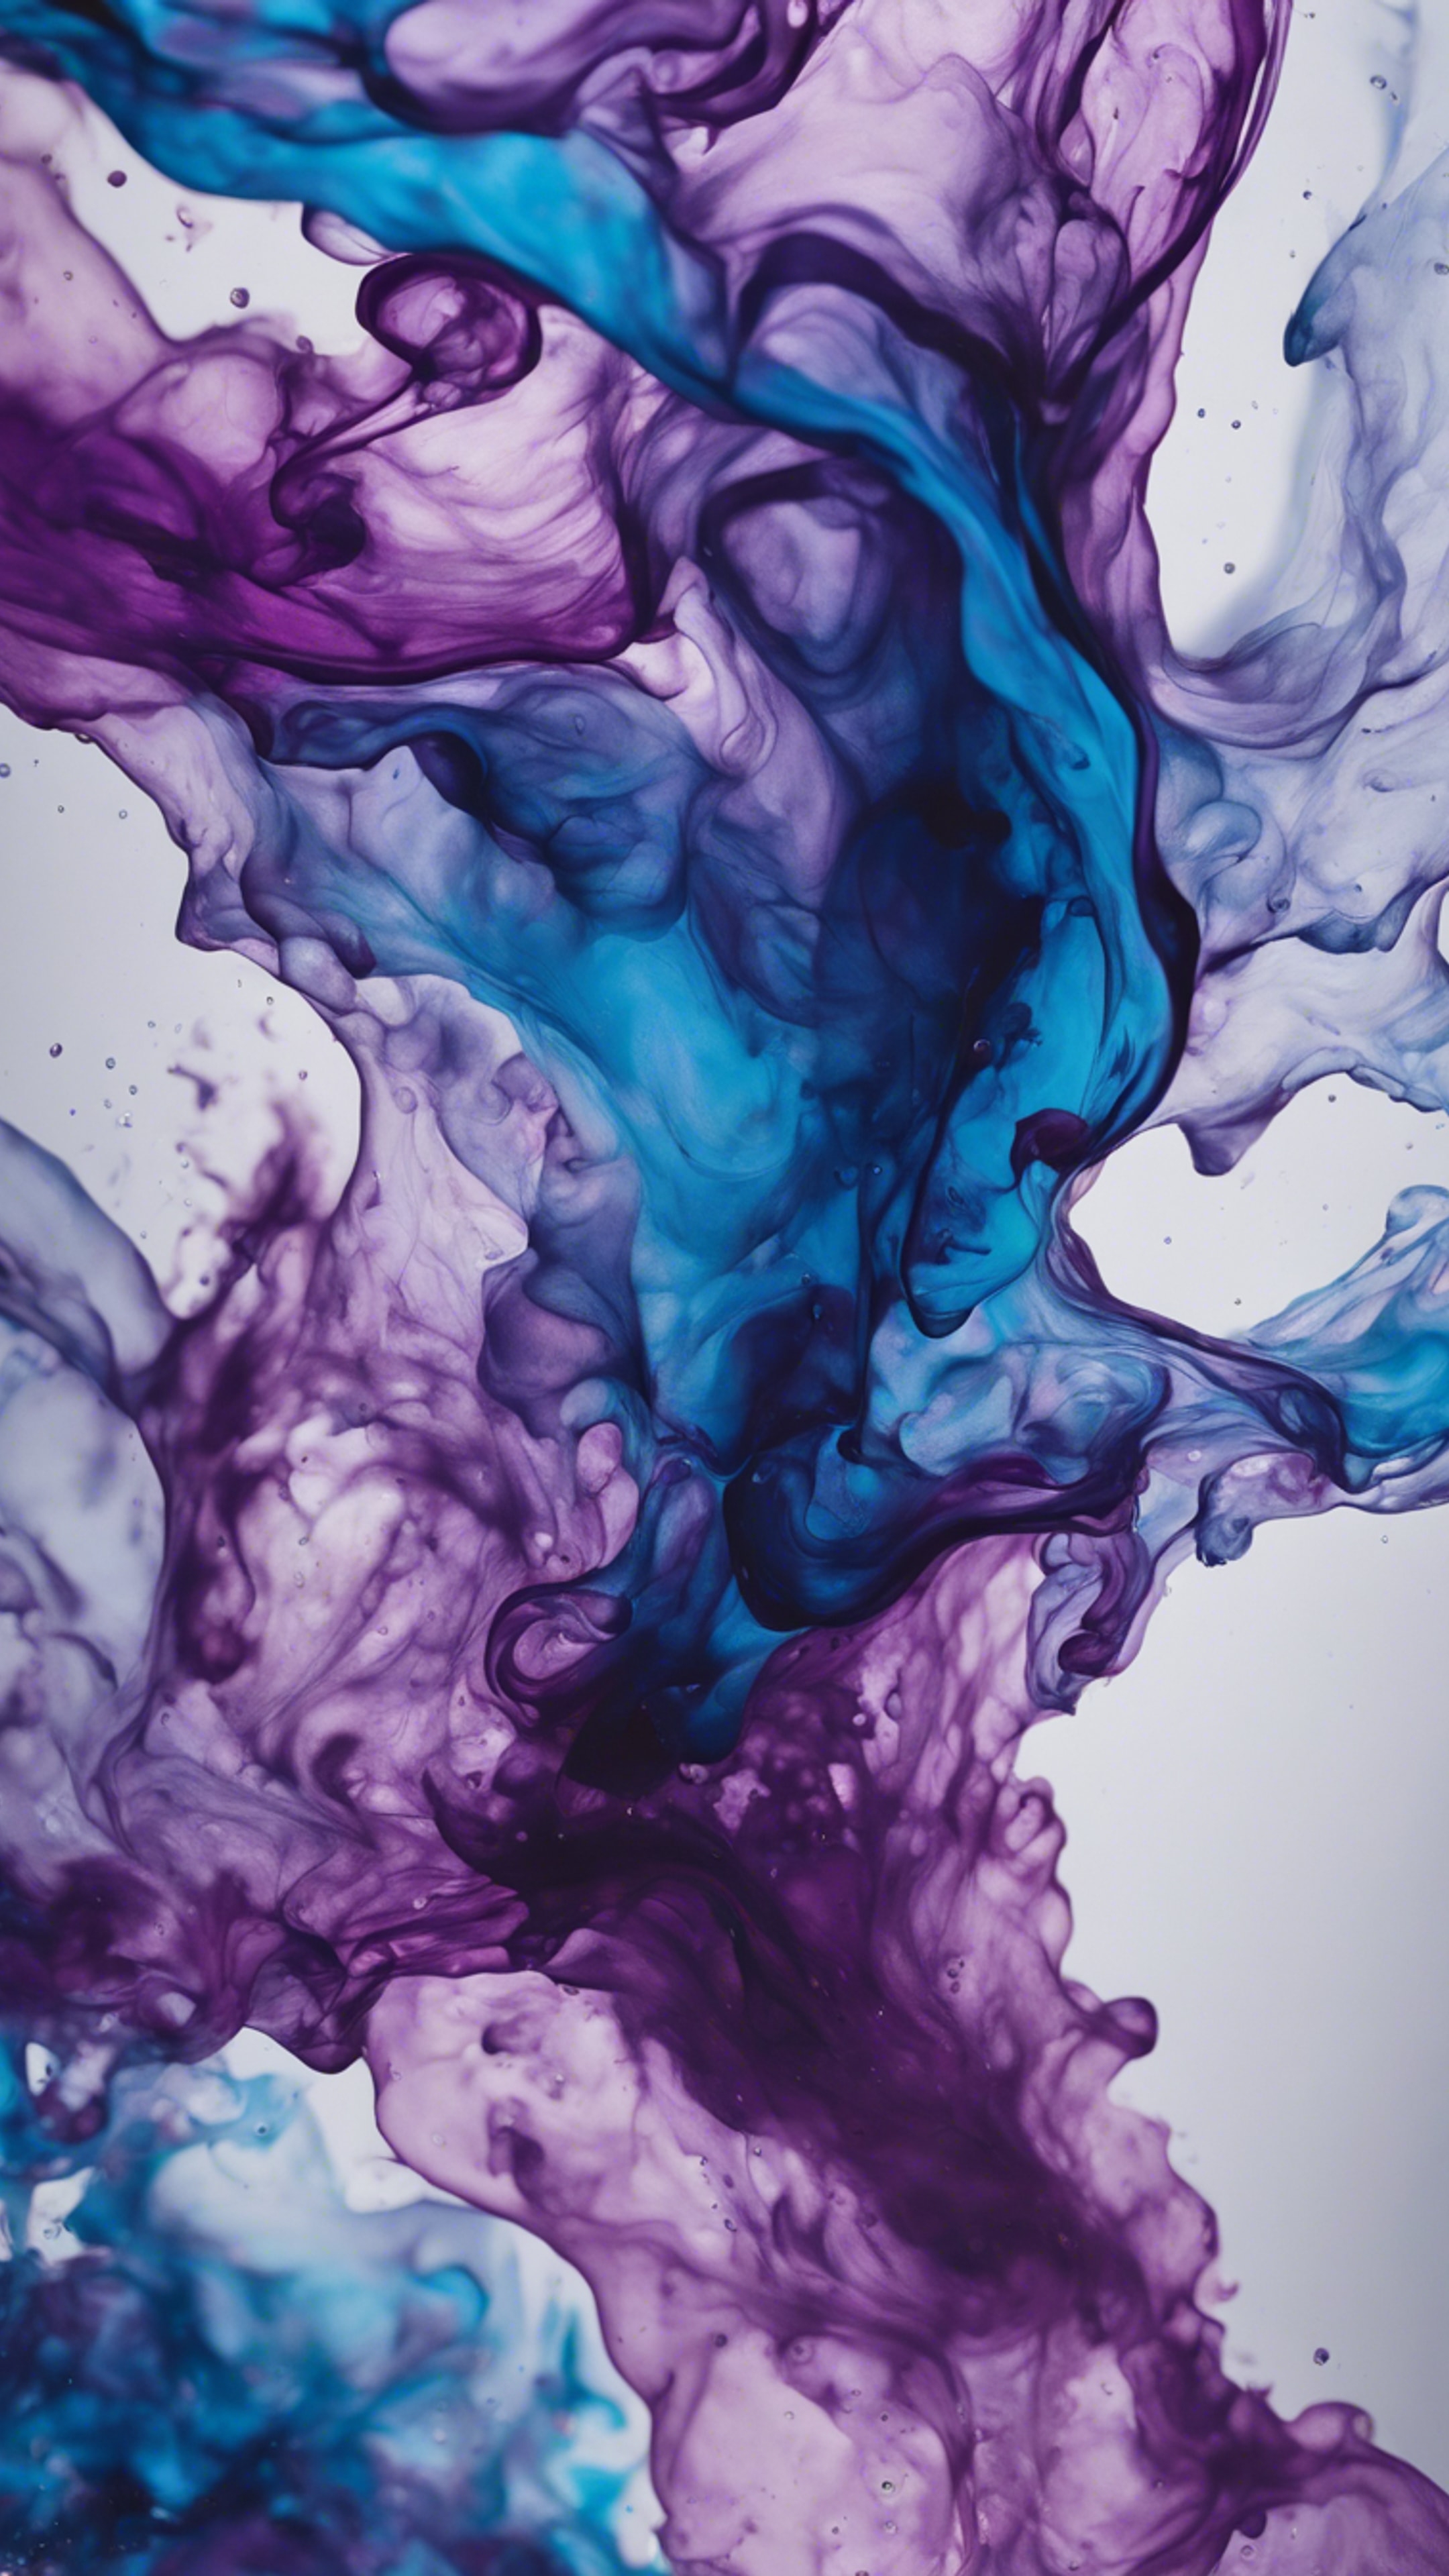 An abstract fluid art piece with swirling waves of ink in hues of cool blue and passionate purple. 牆紙[1f0e9ffb93e84991a030]